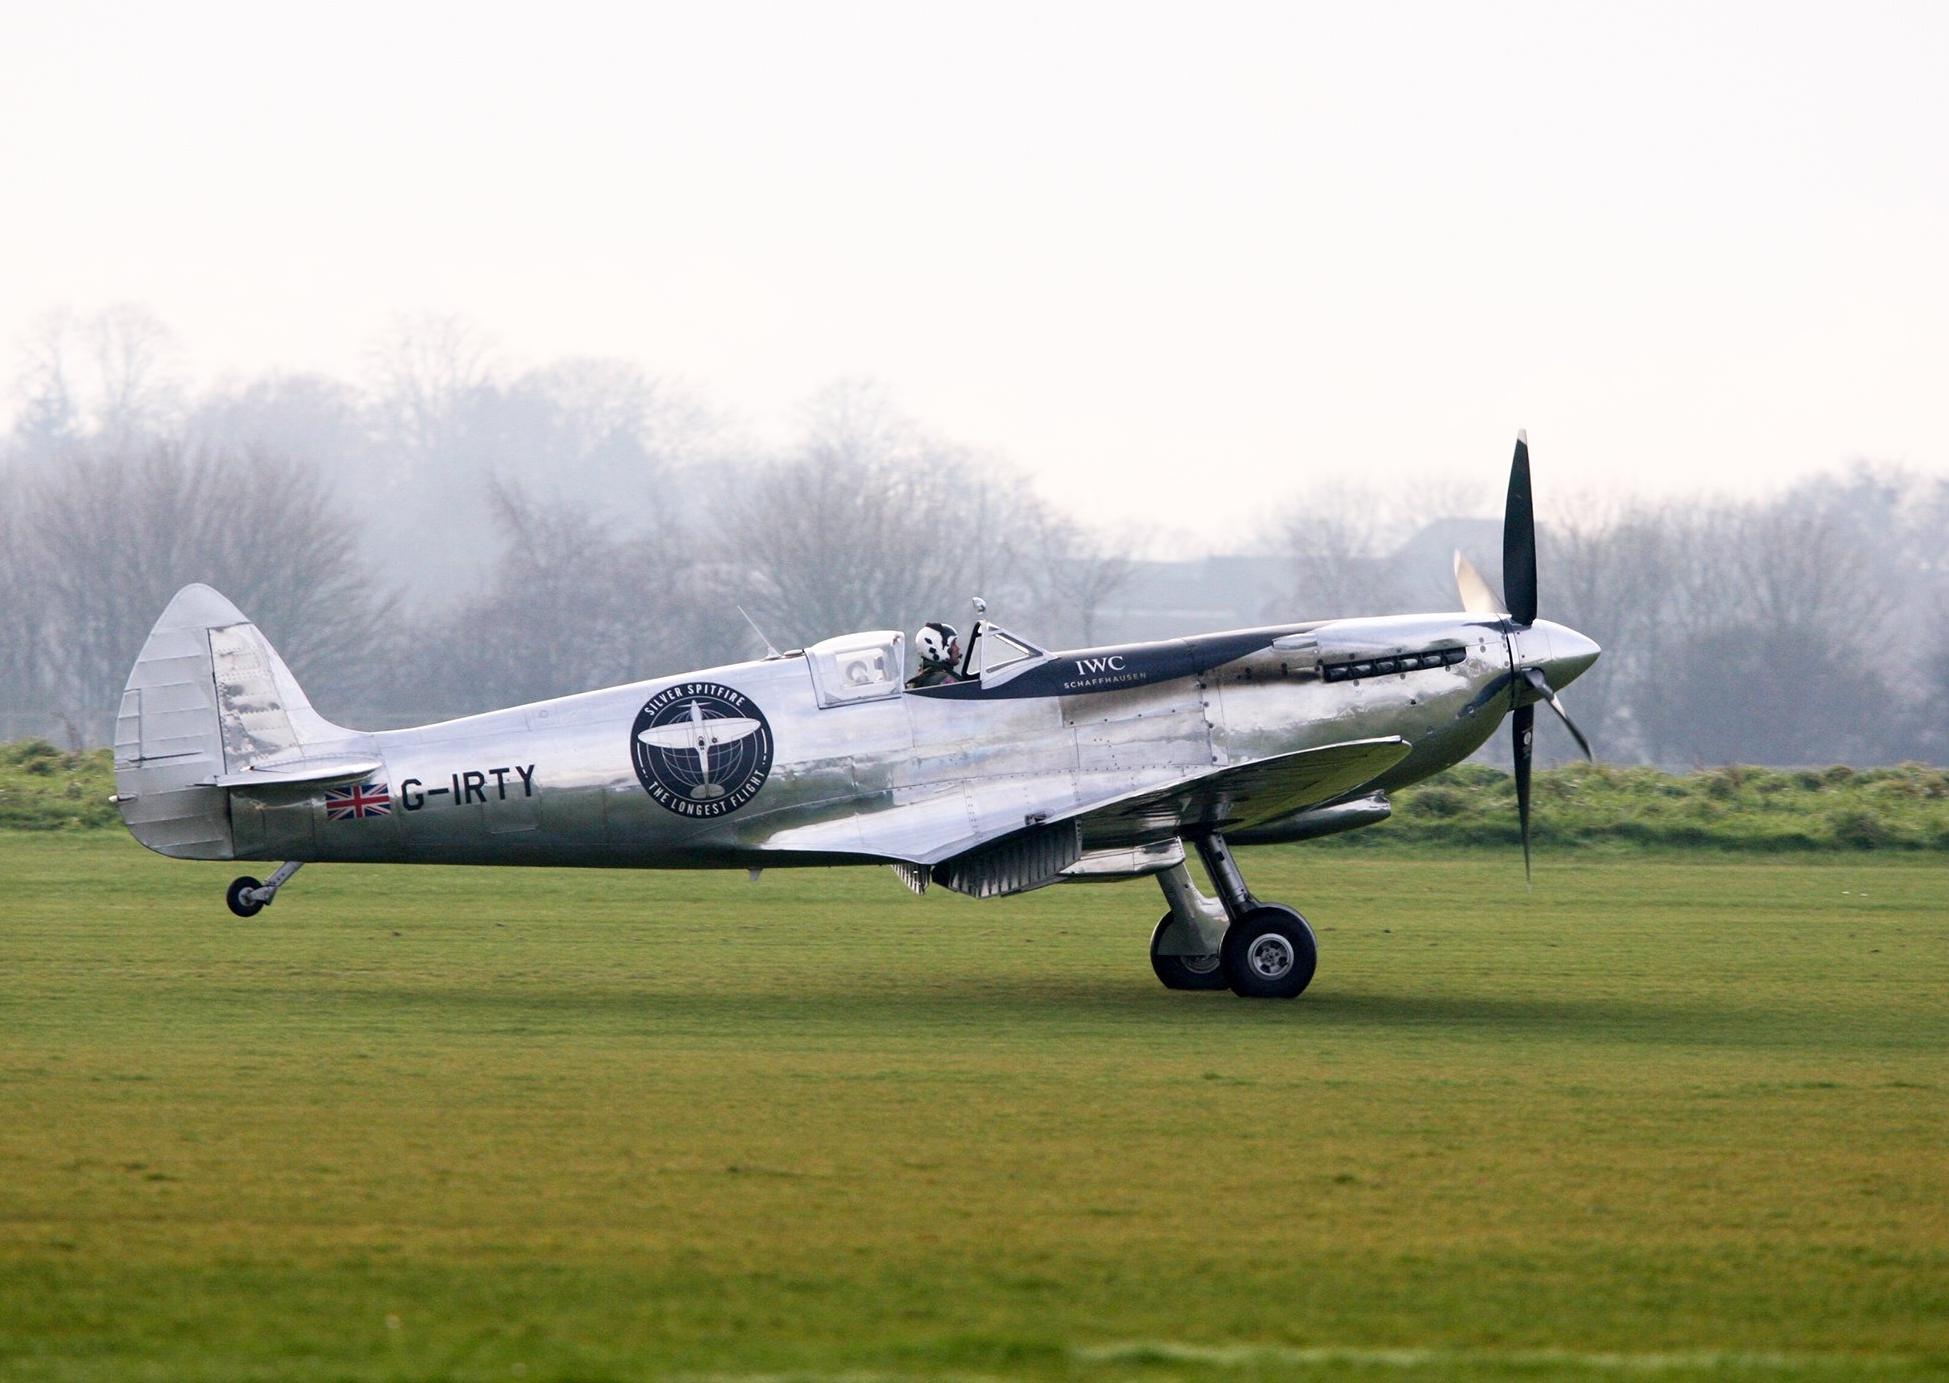 DM19120981a.jpg. A newly-restored spitfire aircraft lands at Goodwood following a 27,000 mile journey around the world. Photo by Derek Martin Photography. SUS-190512-170955008